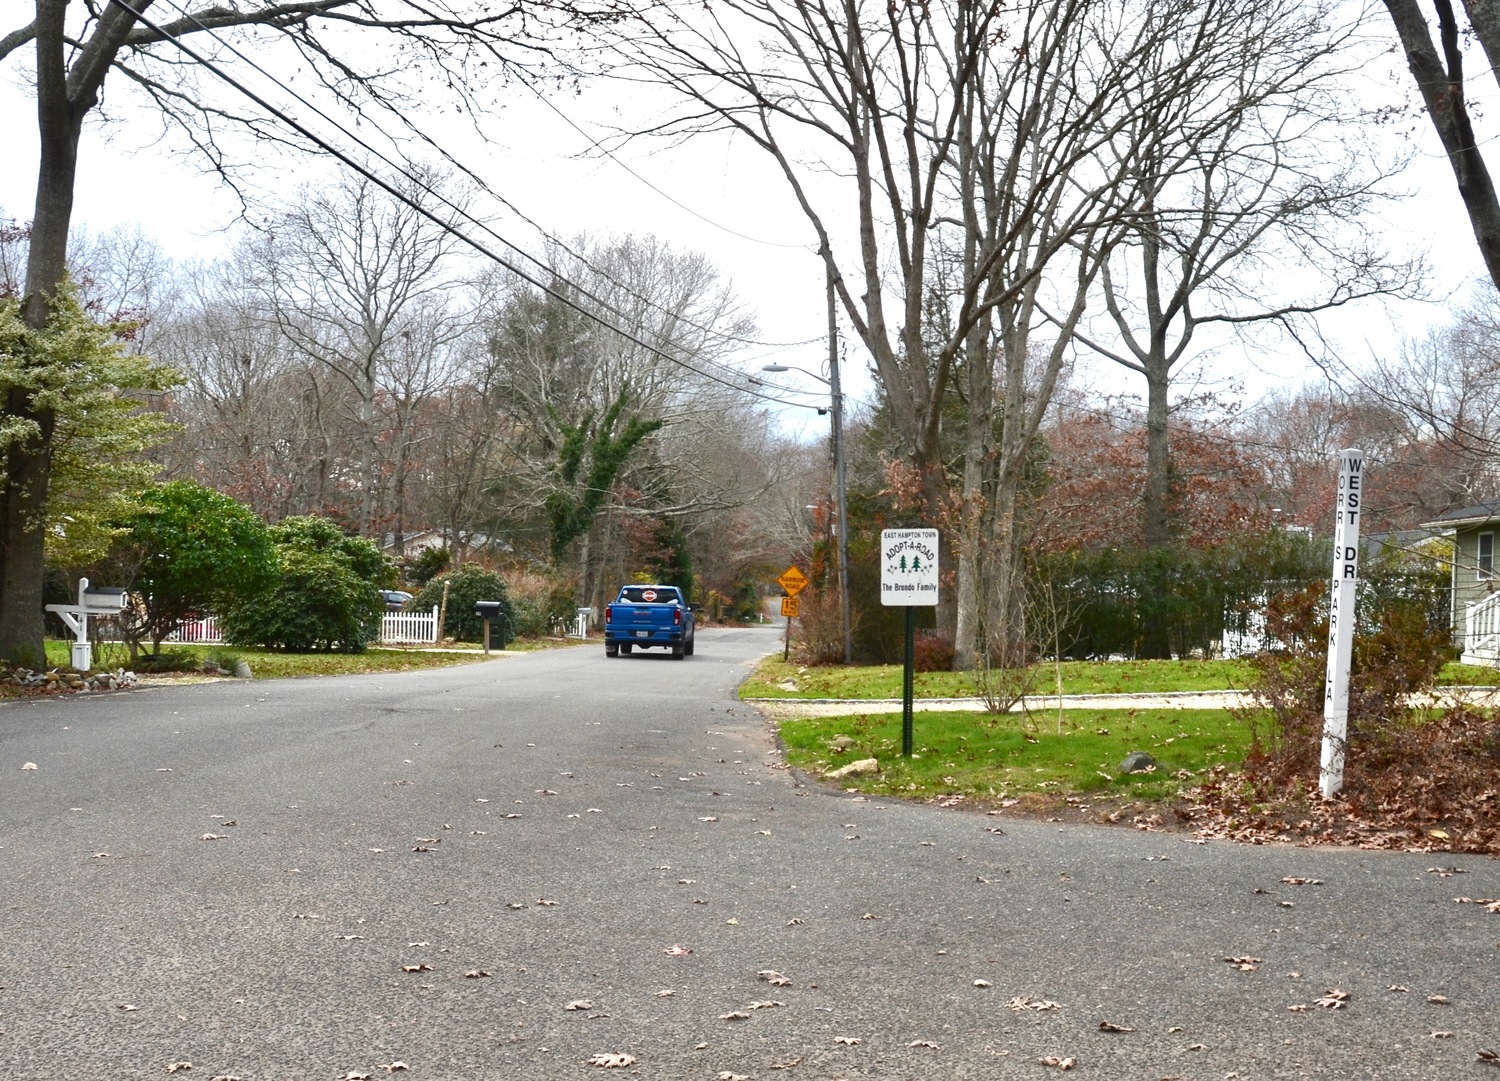 Morris Park Lane and West Drive in northern East Hampton are the latest backroads to be inundated by vehicles trying to dodge traffic backups, to the chagrin of residents. East Hampton Town has proposed imposing a weight limit to at least cut down on the number of heavy commercial vehicles using the narrow residential streets, and two new stop signs to slow some of the cut-through traffic. 
KYRIL BROMLEY